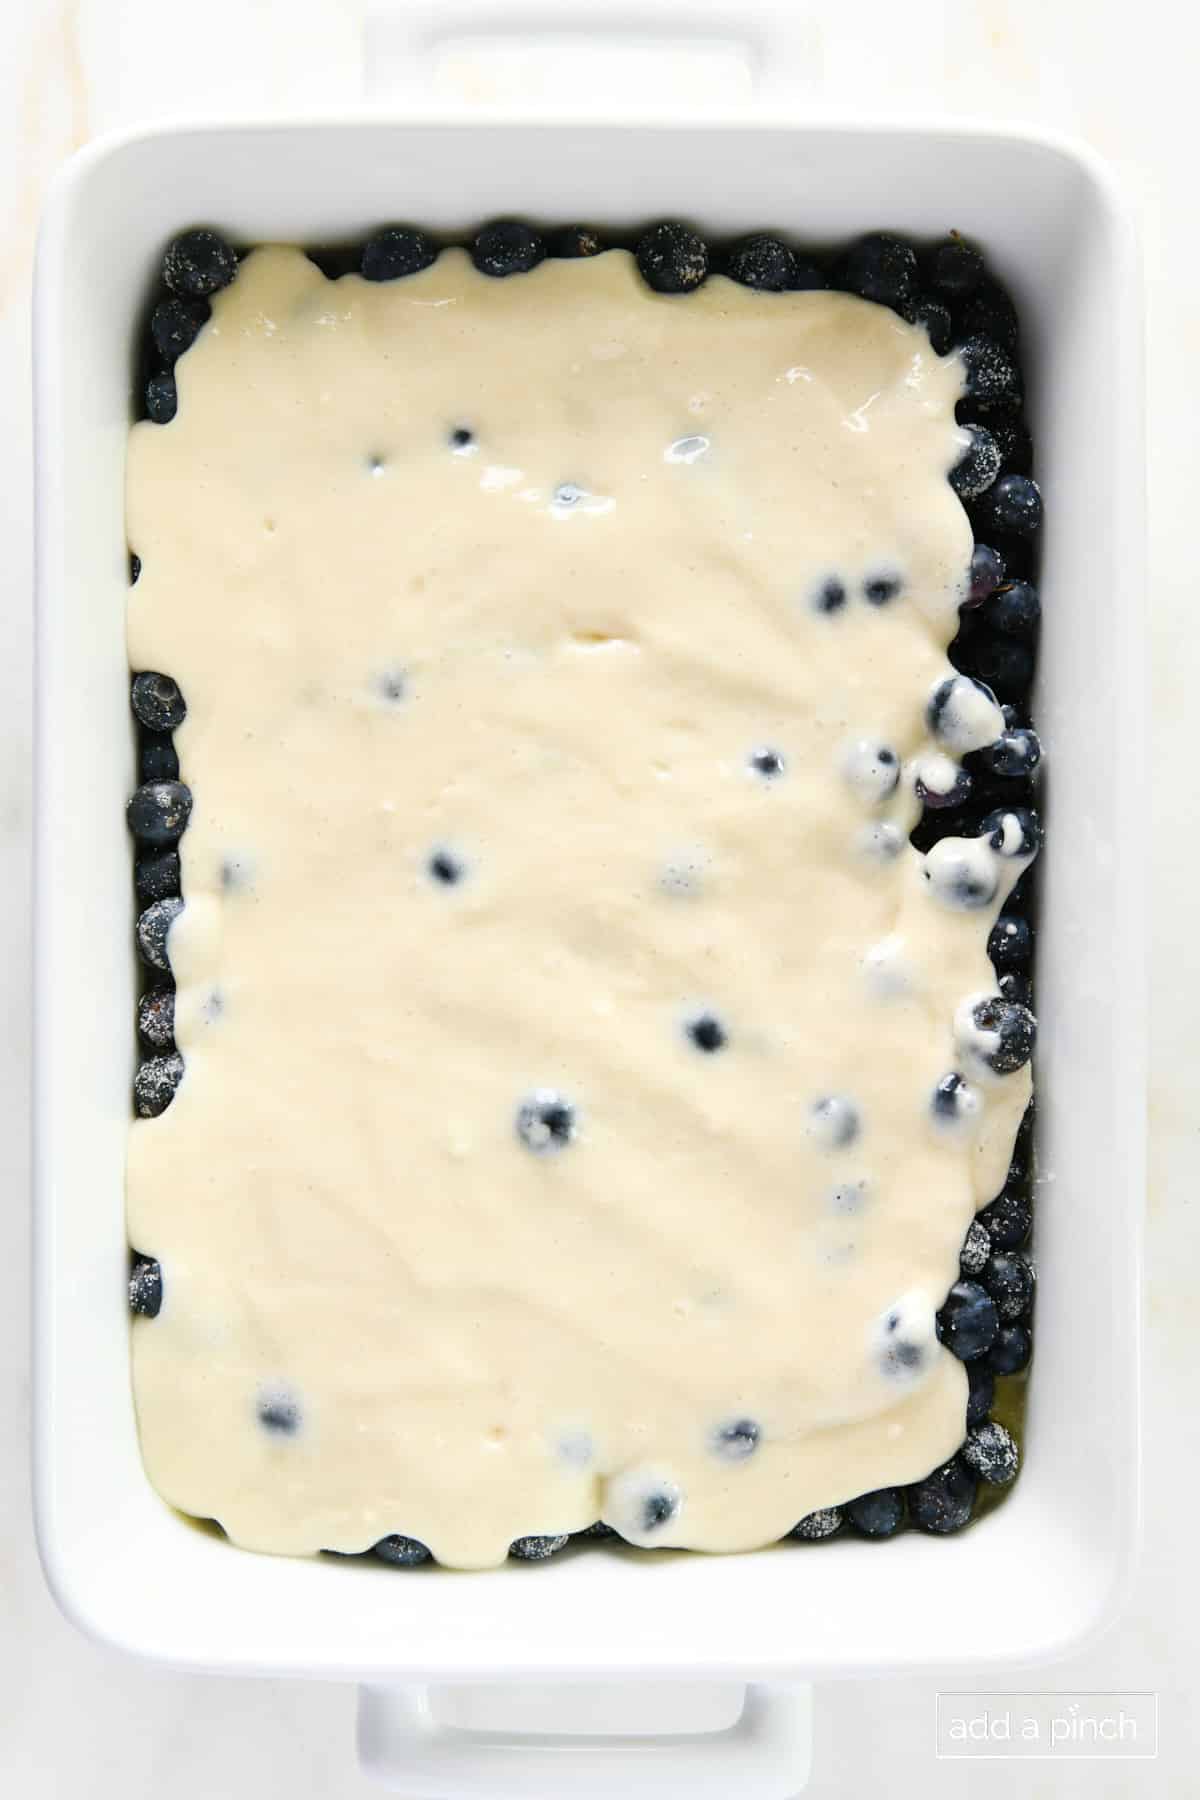 Cobbler batter poured over sugared blueberries in a white baking dish.